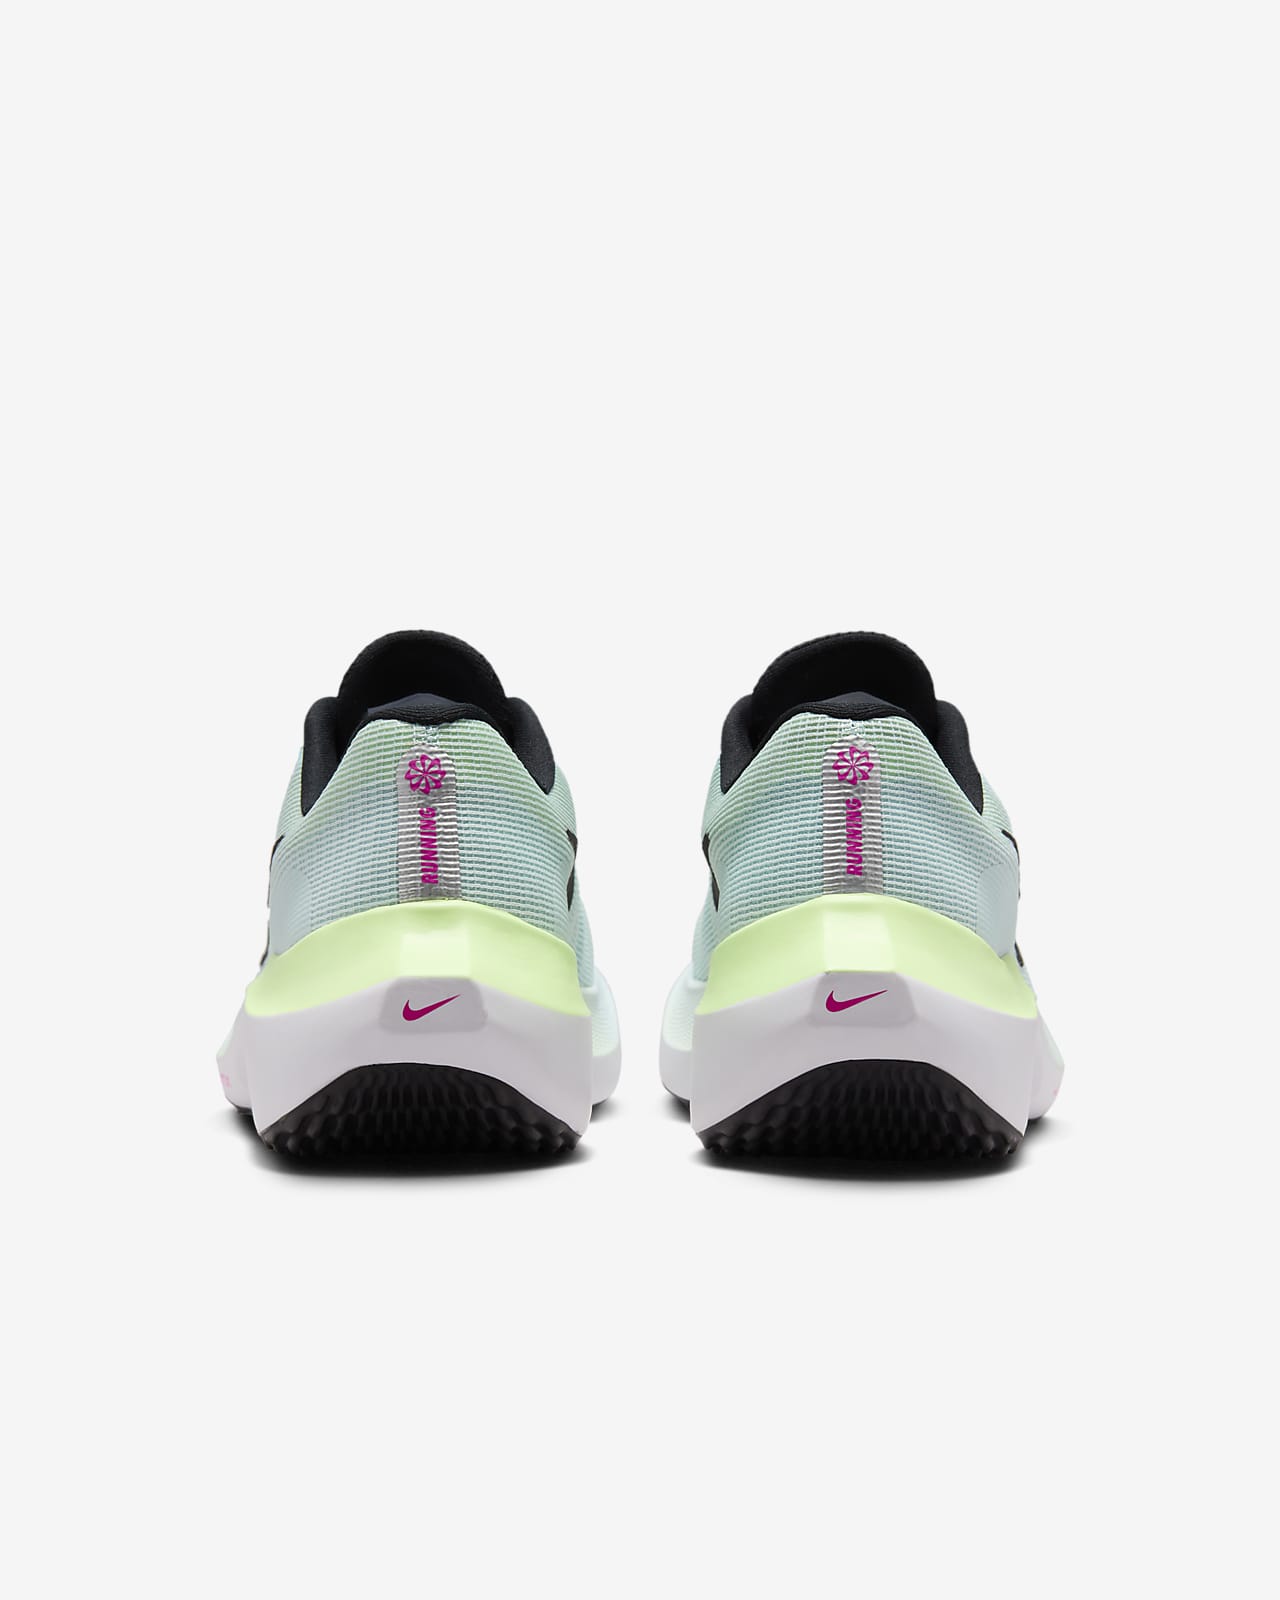 Nike Zoom Fly 5 Women's Road Running Shoes. Nike CA